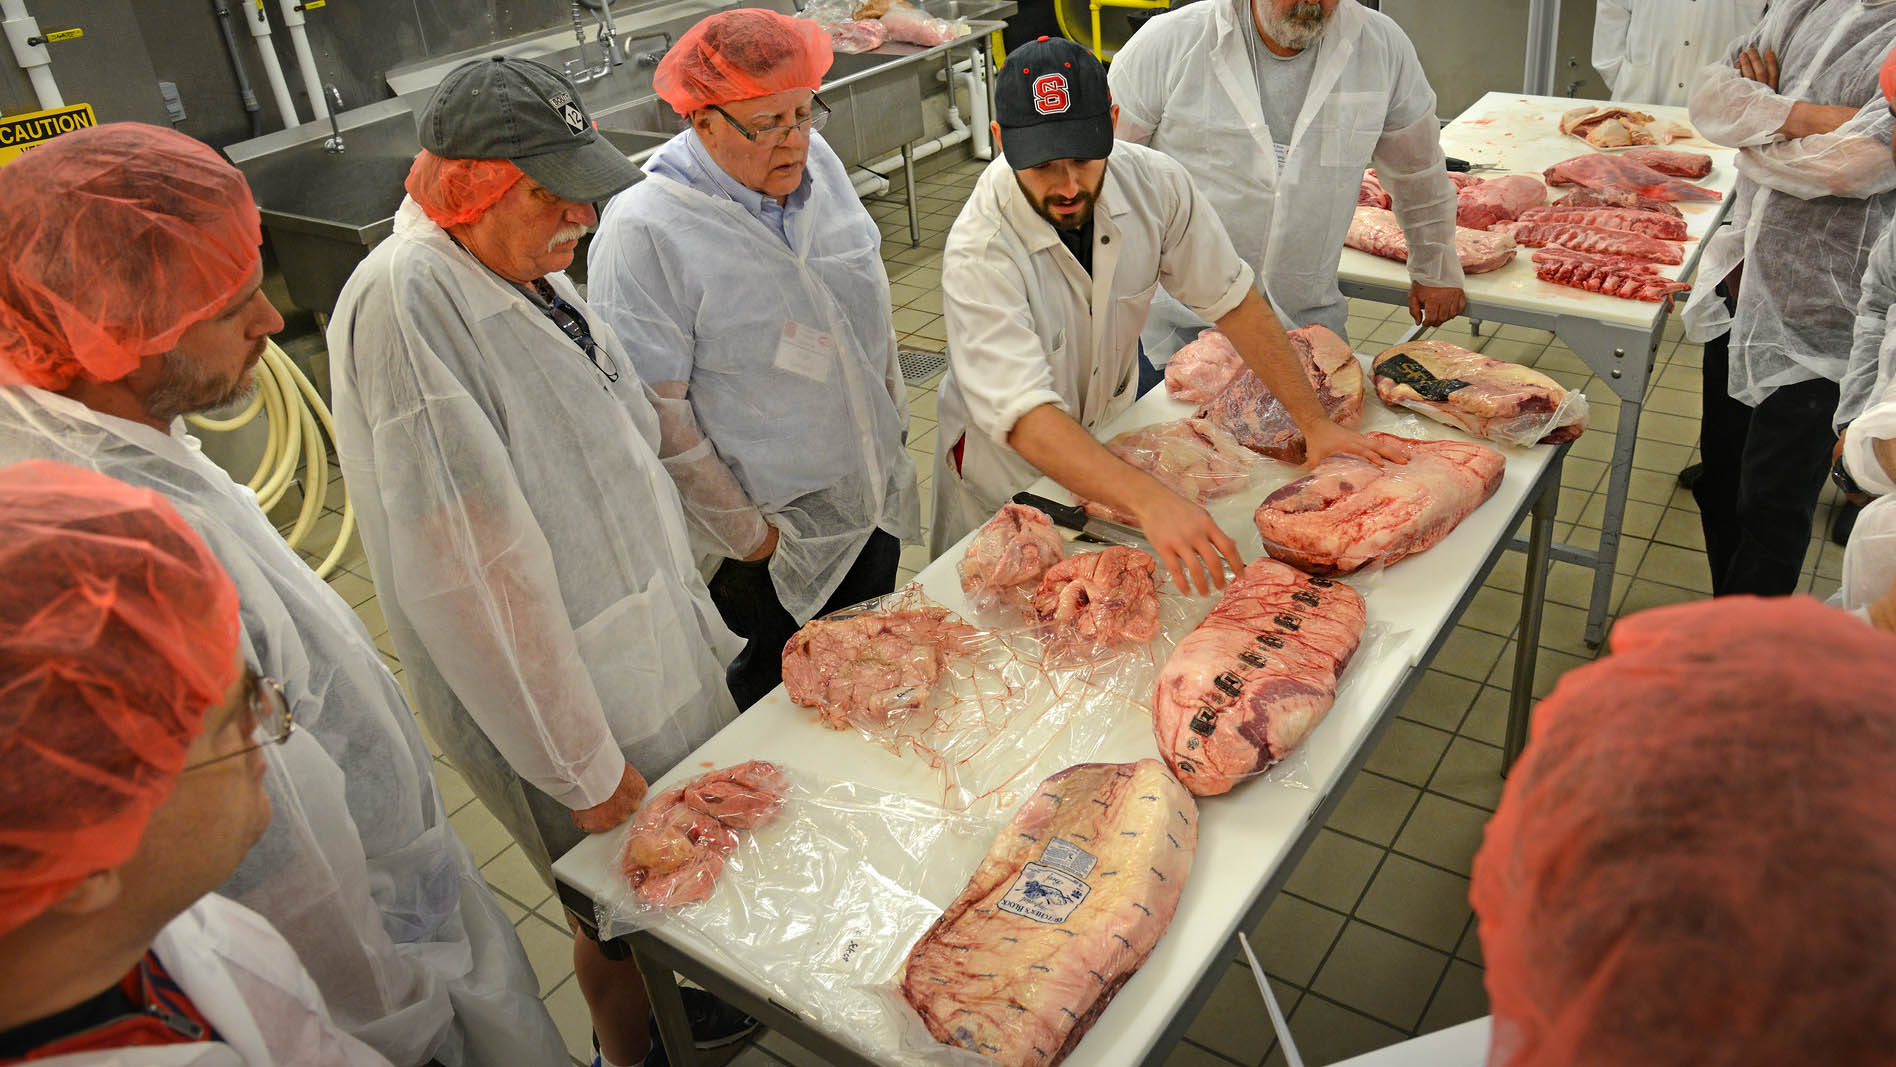 Participants wearing hair nets and food safety coverings gather around a table of fresh cut meats as part of NC State University's BBQ Camp.